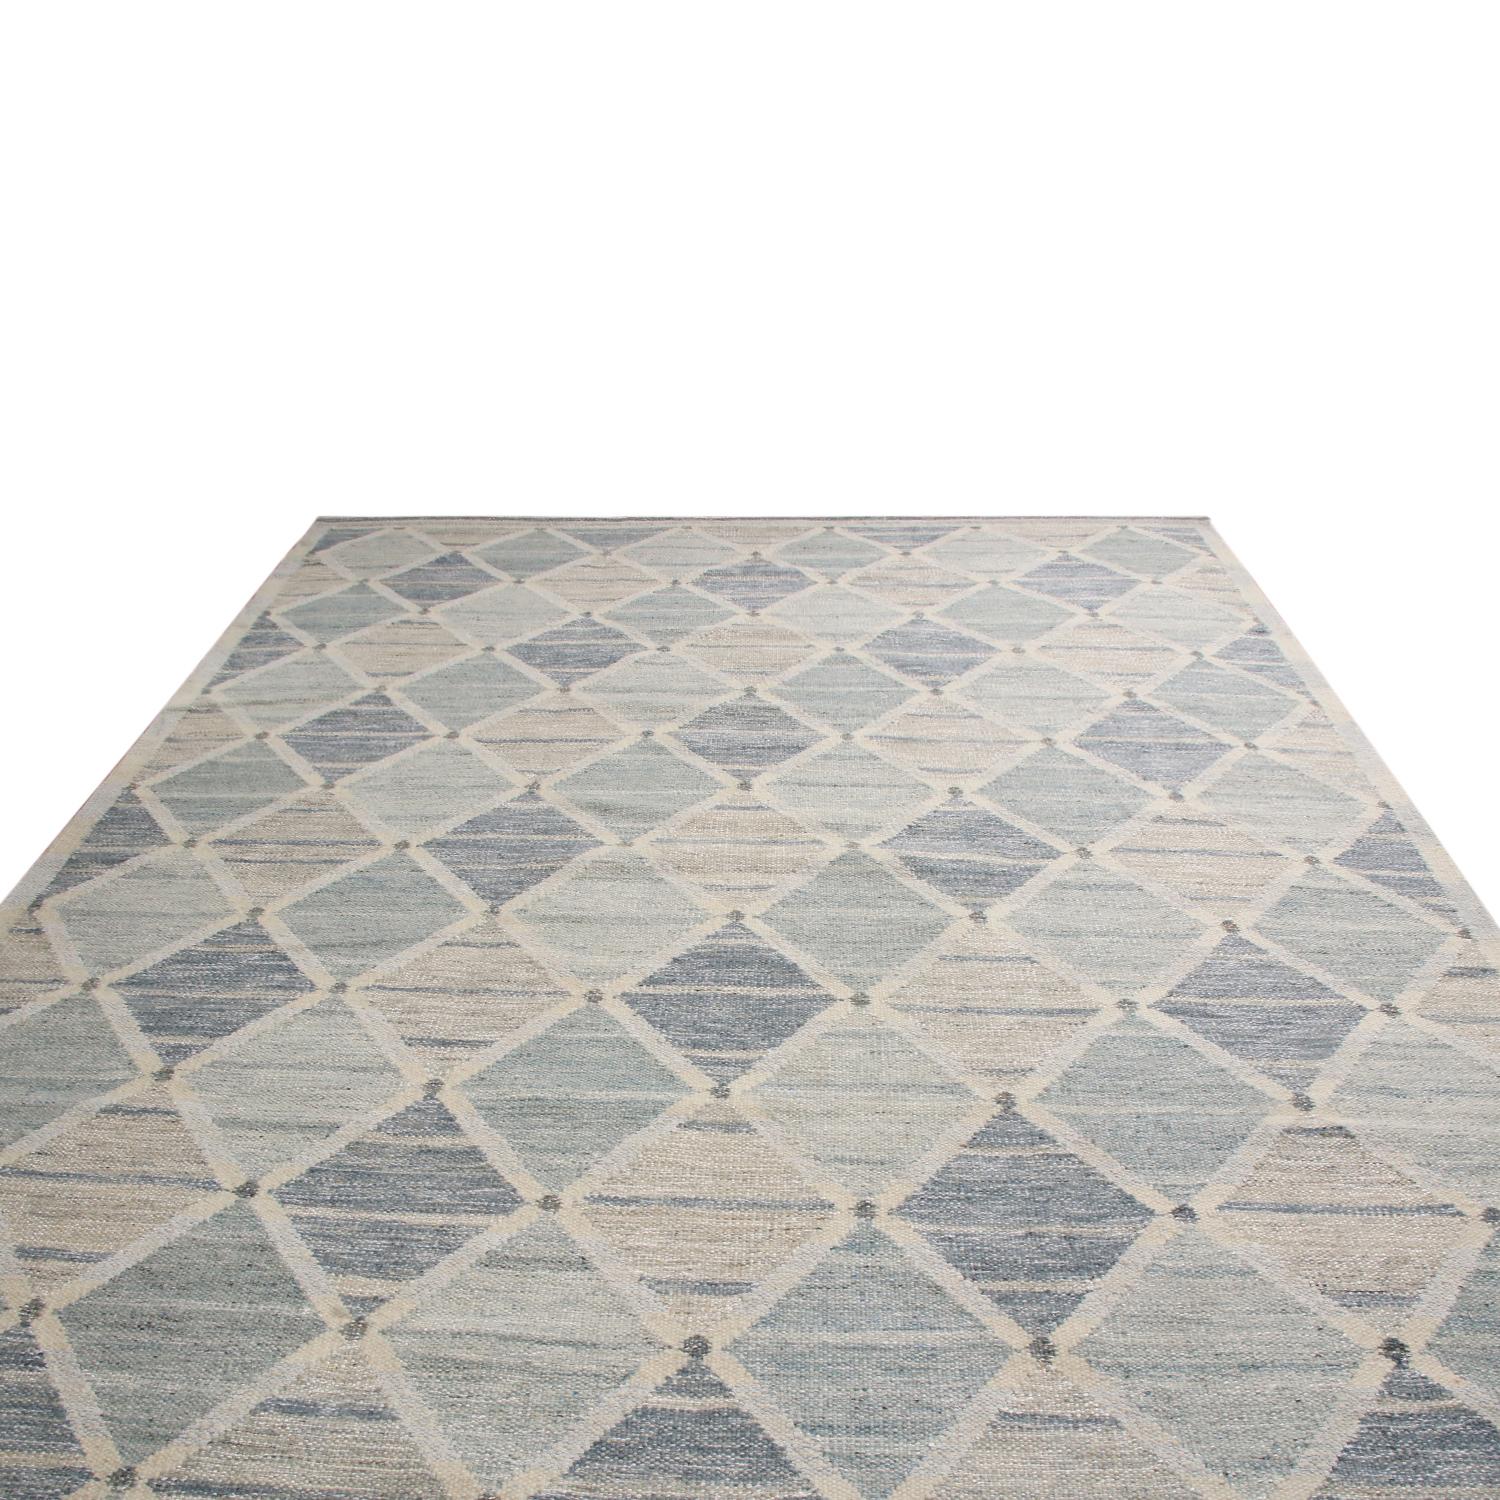 Rug & Kilim’s hand woven Swedish-style rug hails from the latest wool flat weave additions to the Scandinavian collection, a celebration of large-scale geometry and exciting vintage colorways like that of their mid-century inspirations. The abrashed